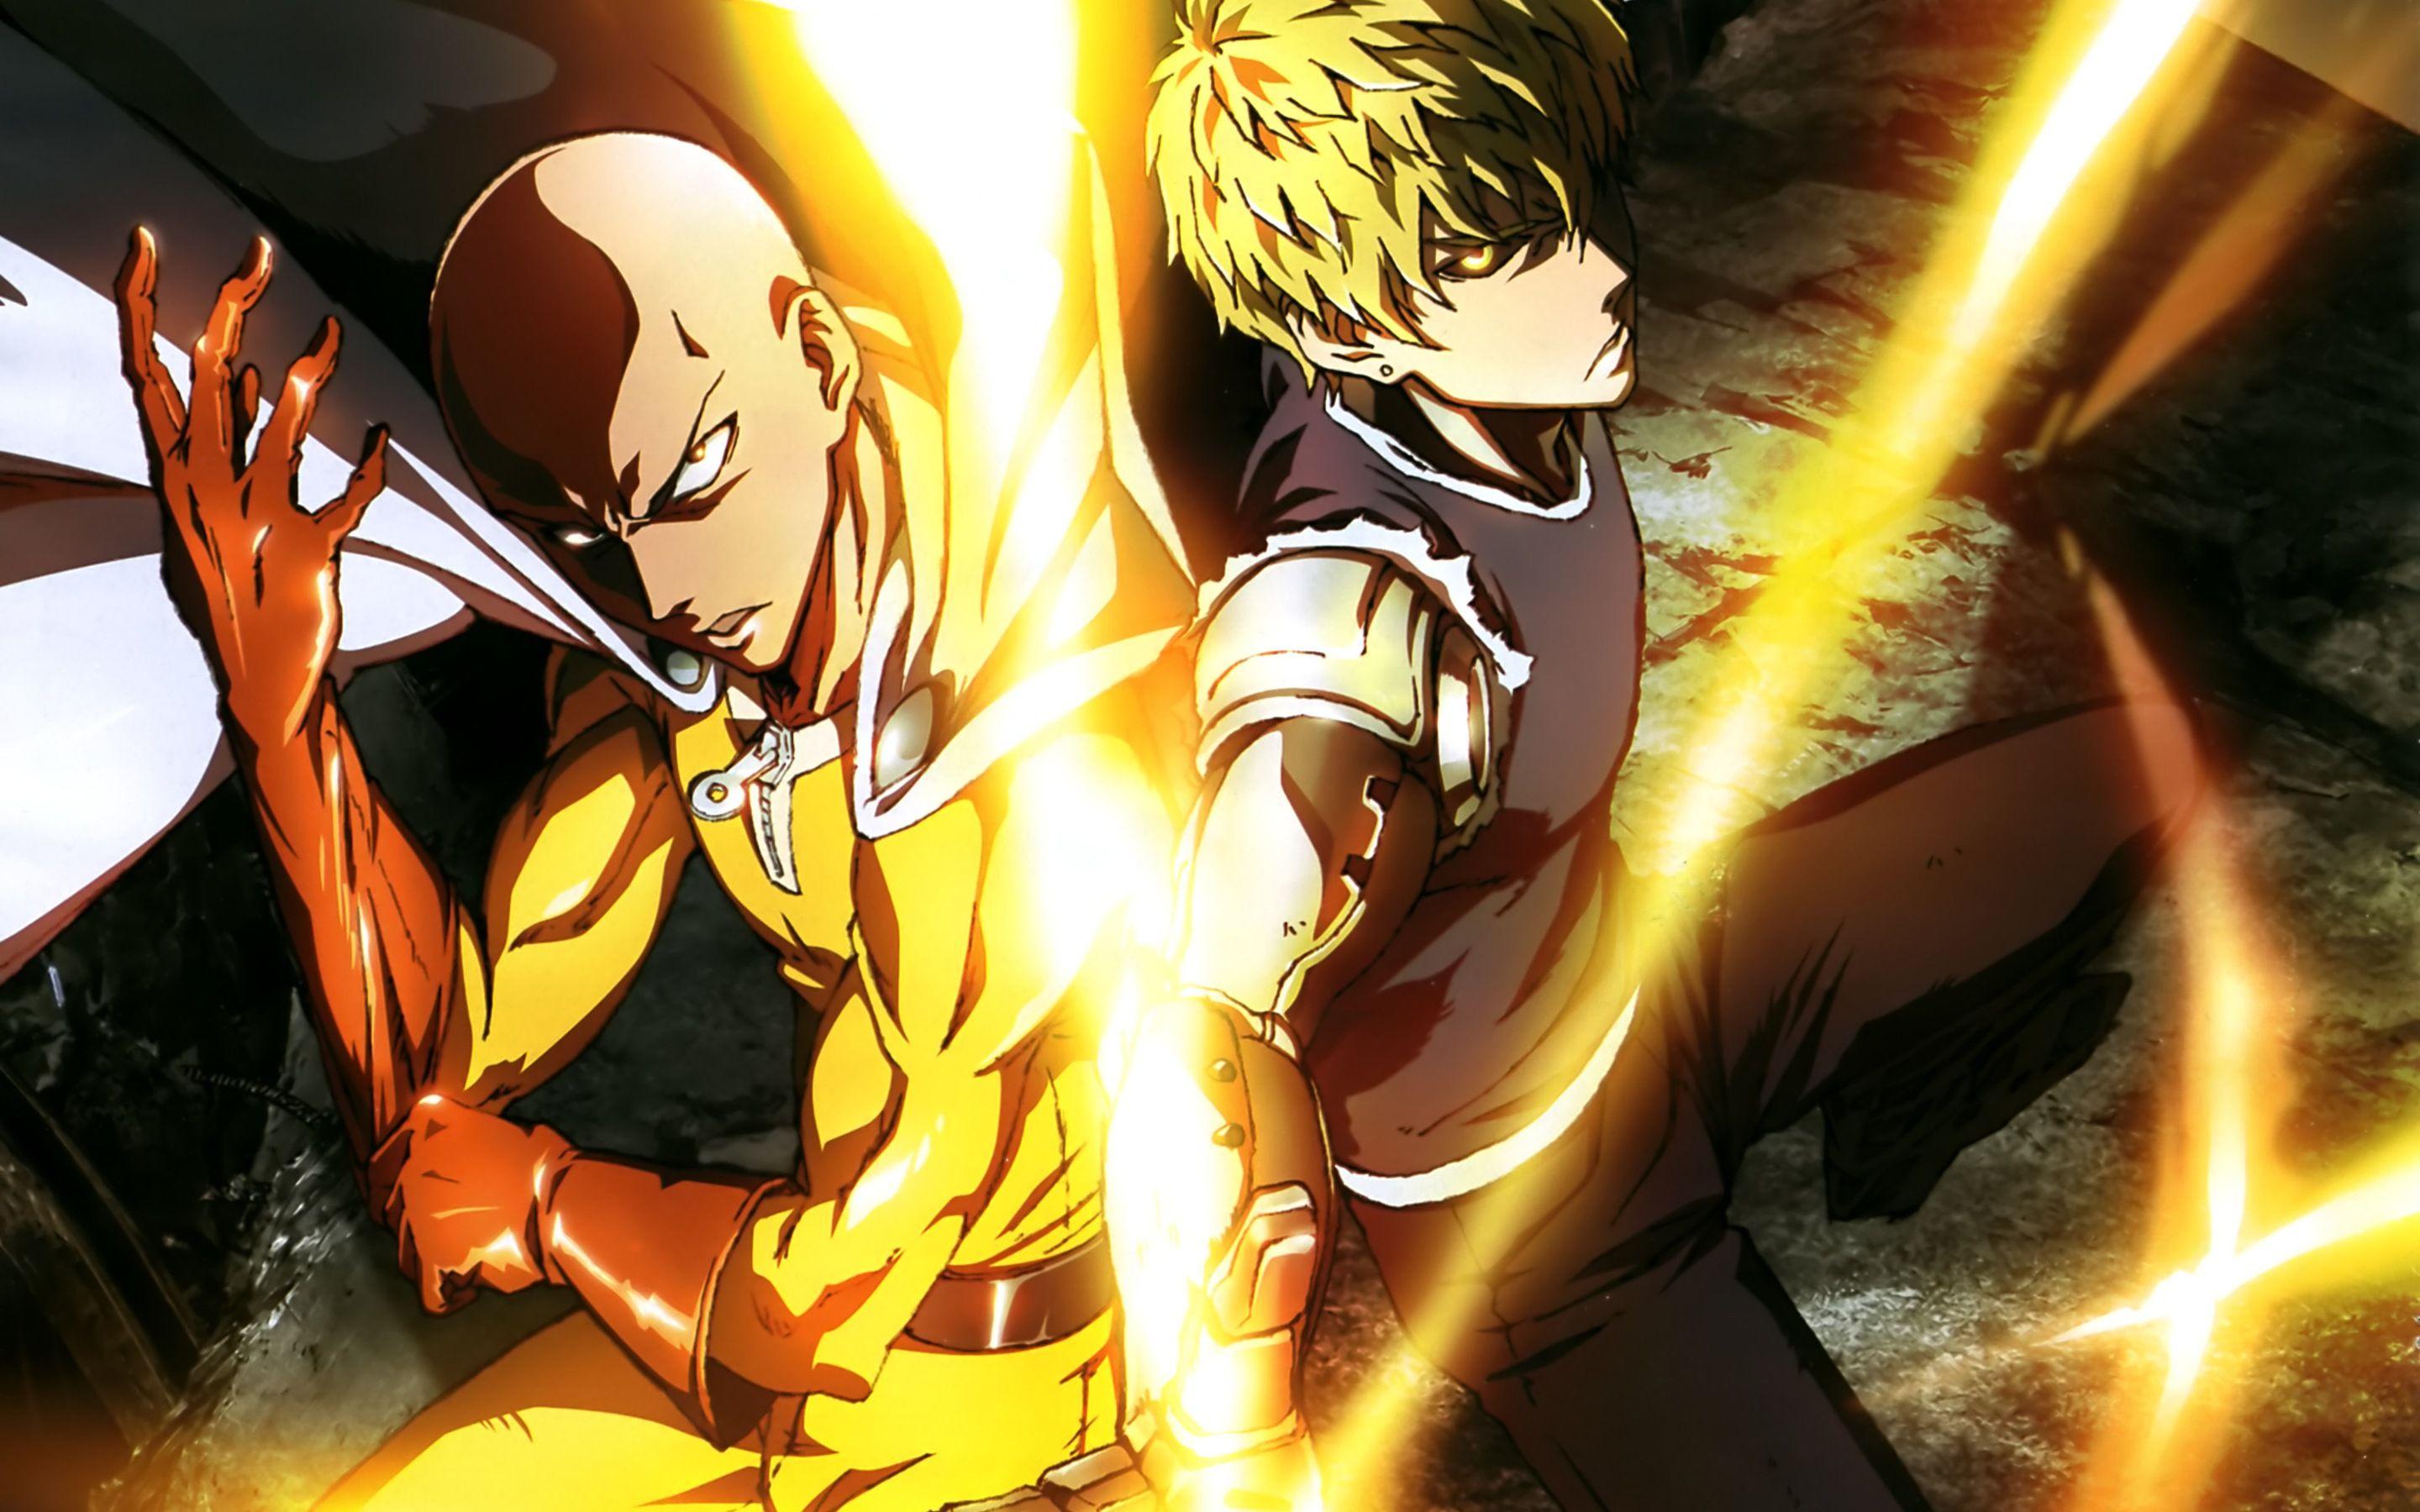 4k One Punch Man Wallpaper iPhone, Android and Desktop!